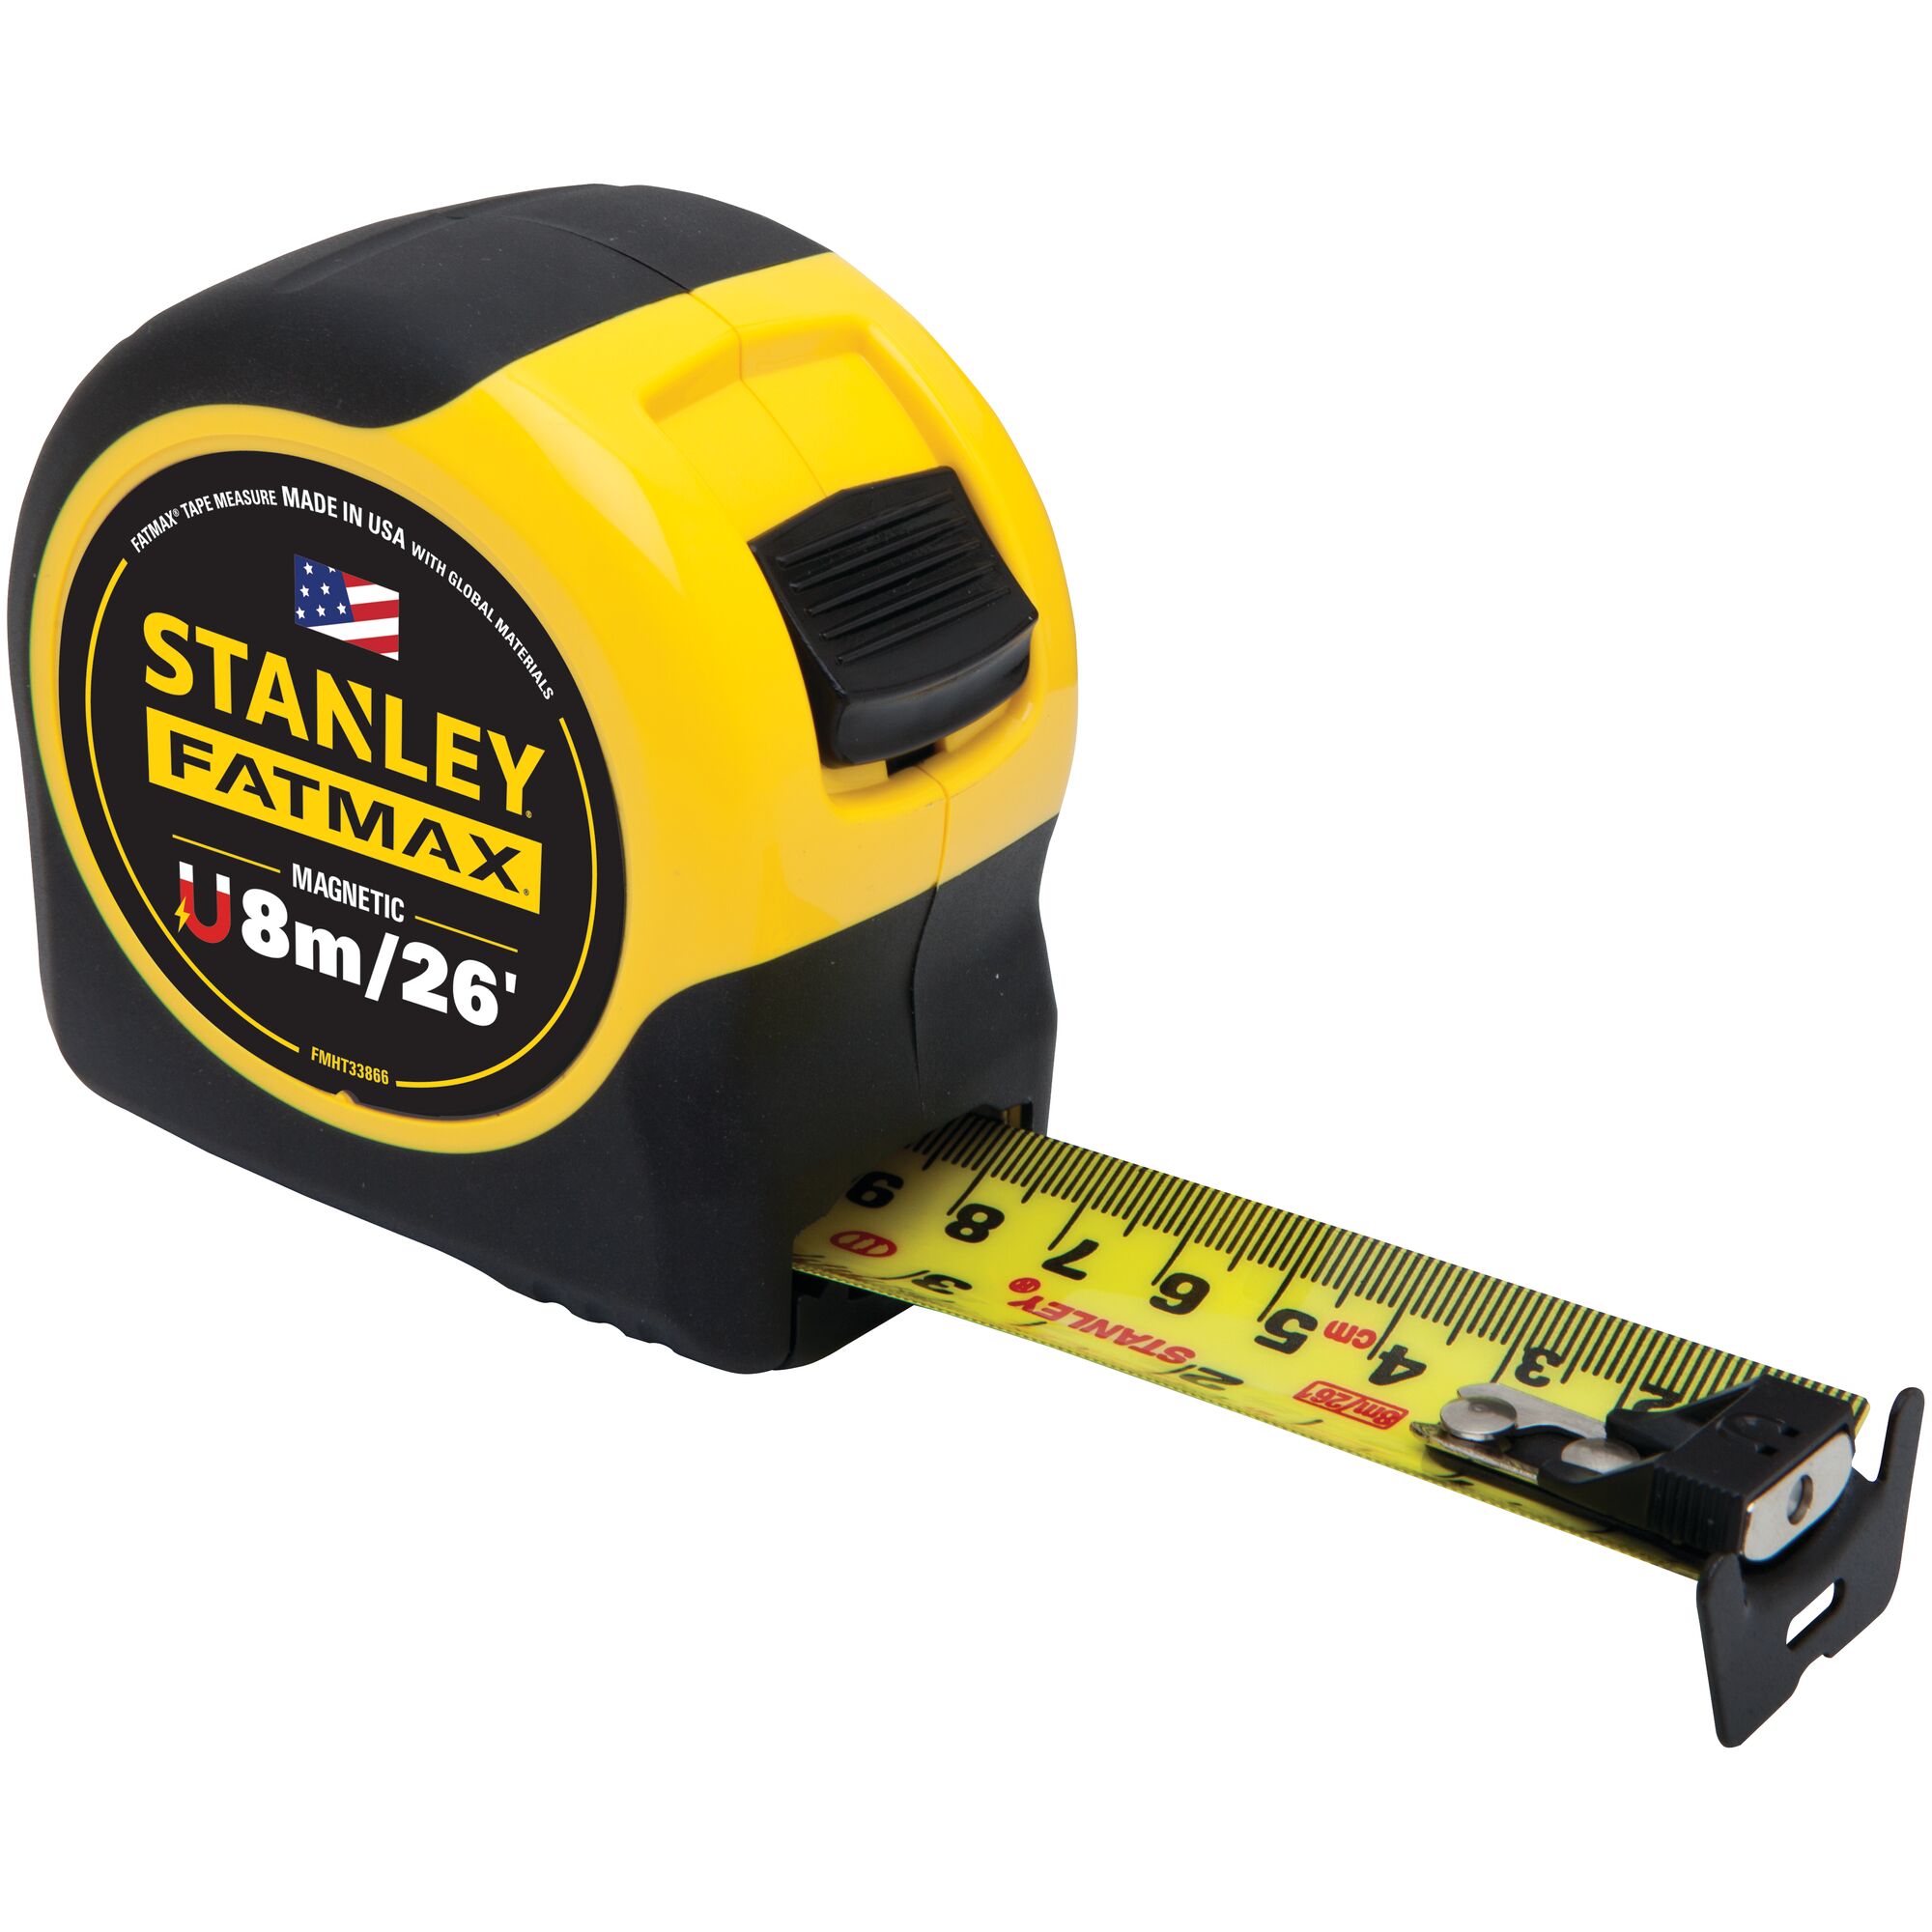 STANLEY 0-33-868 8m FatMax Metric Only Blade Armour Magnetic Tape Measure 